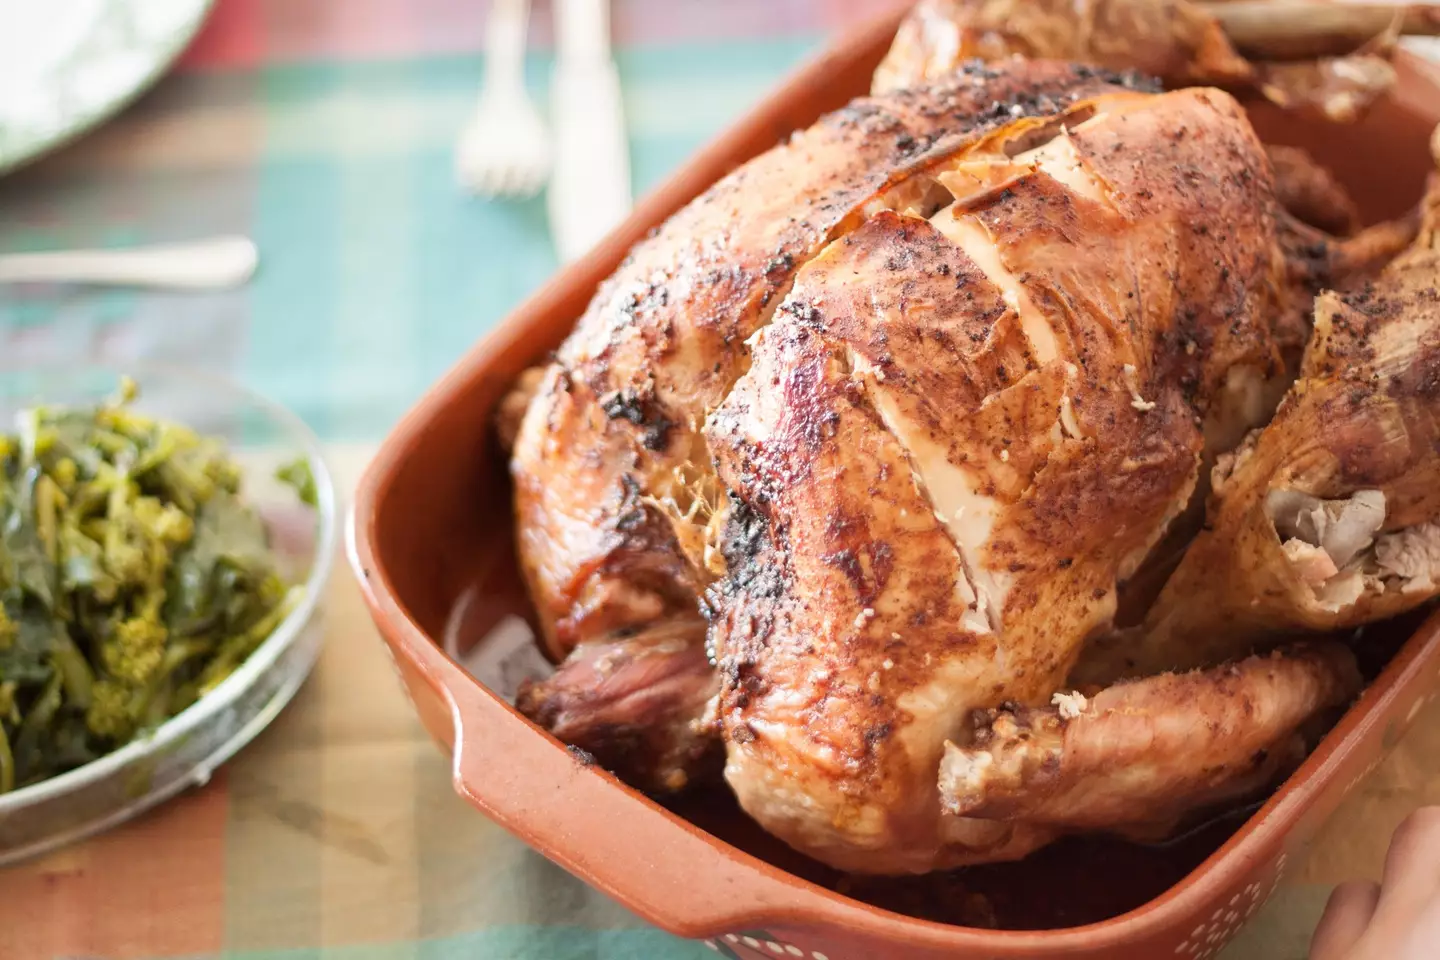 Brits are flocking to Twitter in outrage after their turkey went 'rotten' just before Christmas Day.